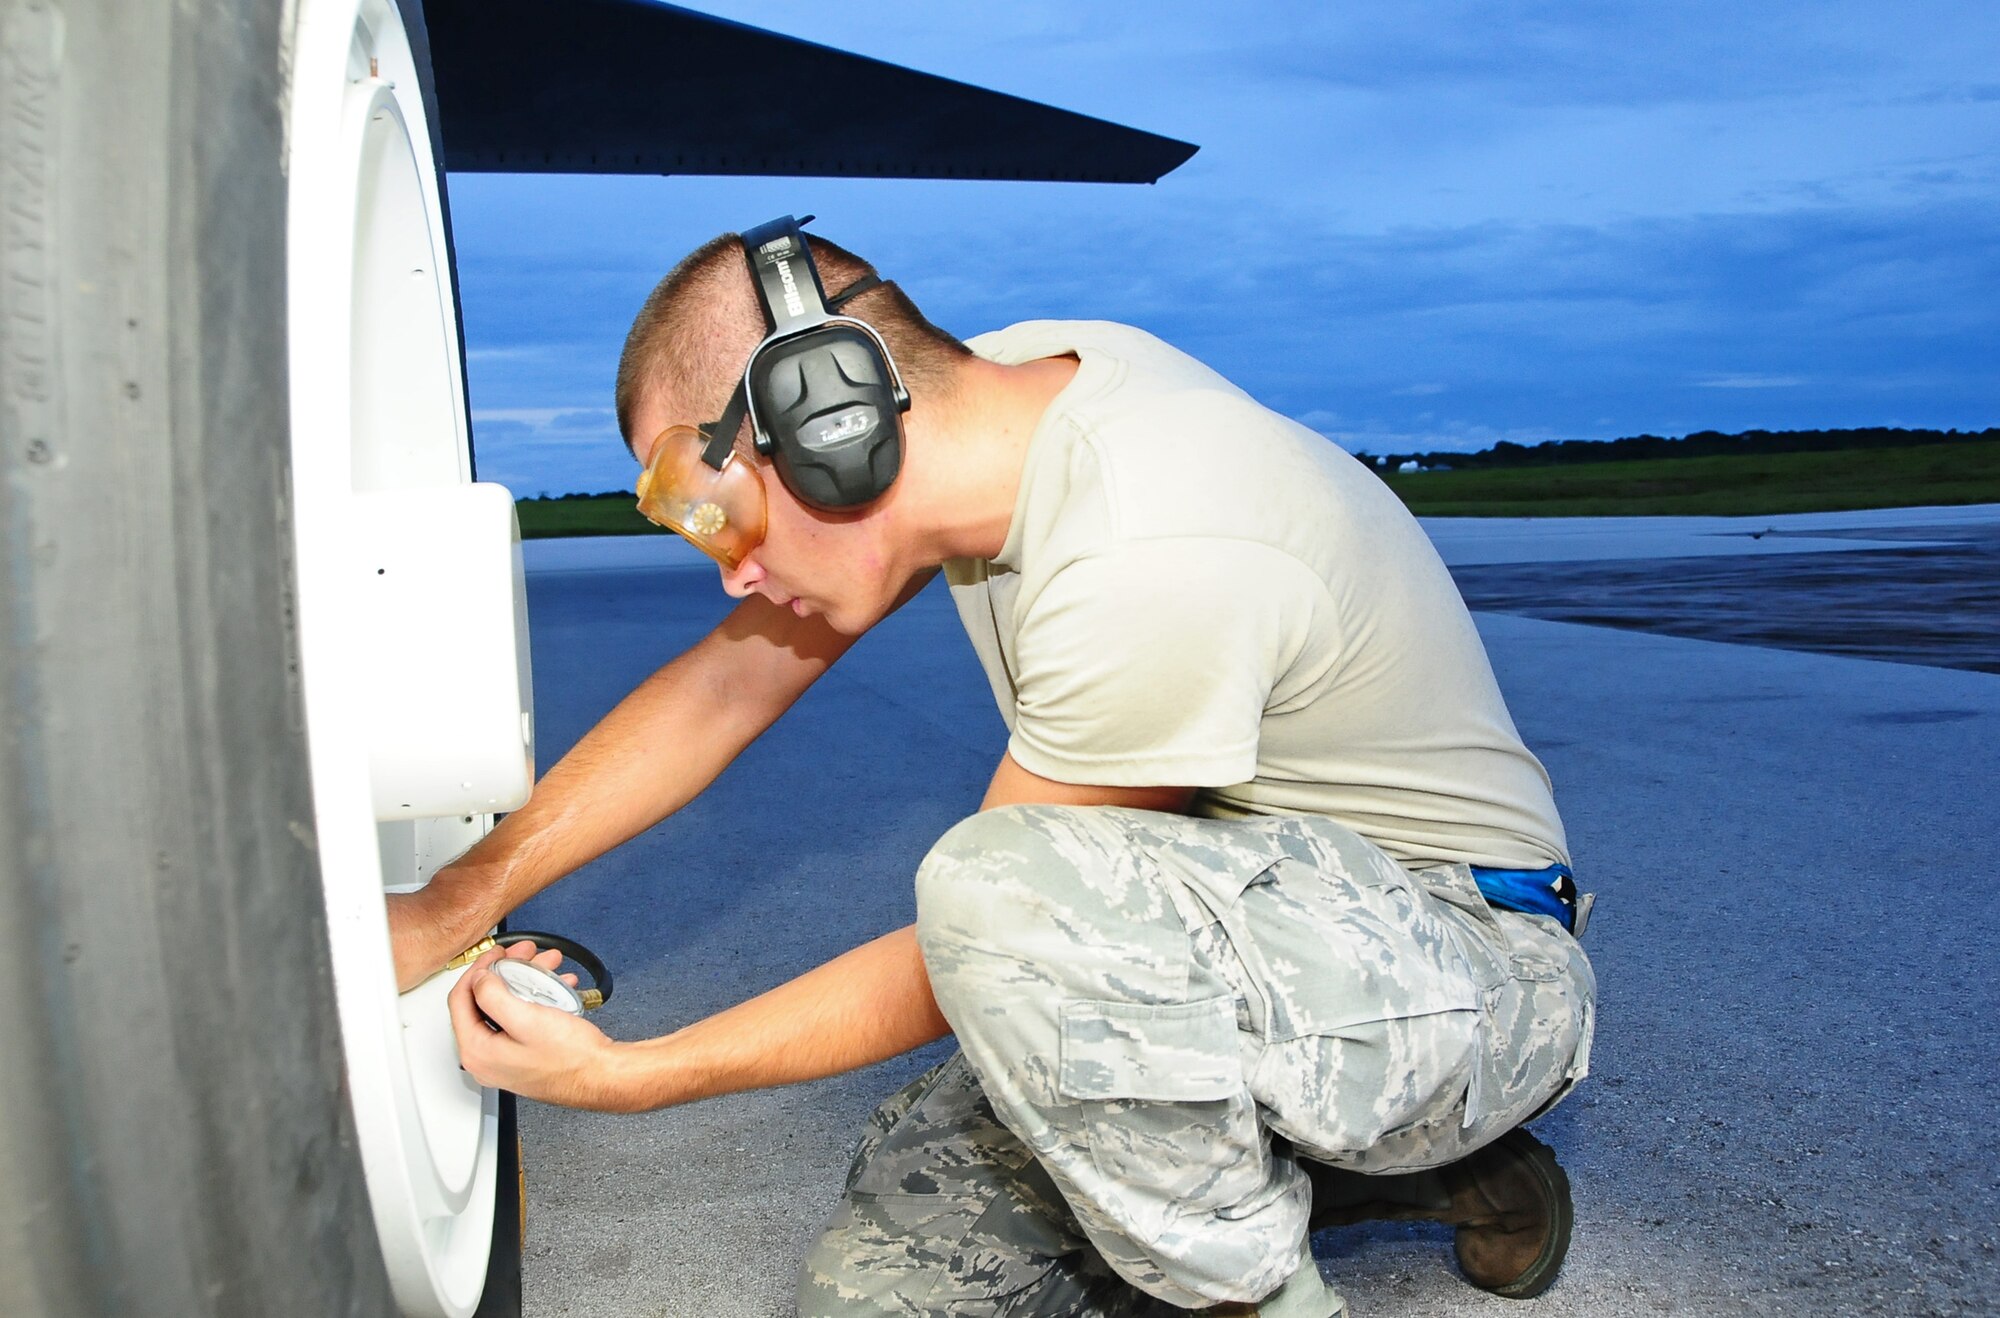 ANDERSEN AIR FORCE BASE, Guam -- Airman 1st Class Bruce Brimm, 36th Expeditionary Aircraft Maintenance Squadron crew chief, checks the tire pressure on the B-52 Stratofortress during a pre-flight inspection here July 31. The 36th EAMXS Airmen make sure the B-52 is ready for the flight in support of the Rim of the Pacific Exercise. (U.S. Air Force photo by Airman 1st Class Marianique Santos/Released)